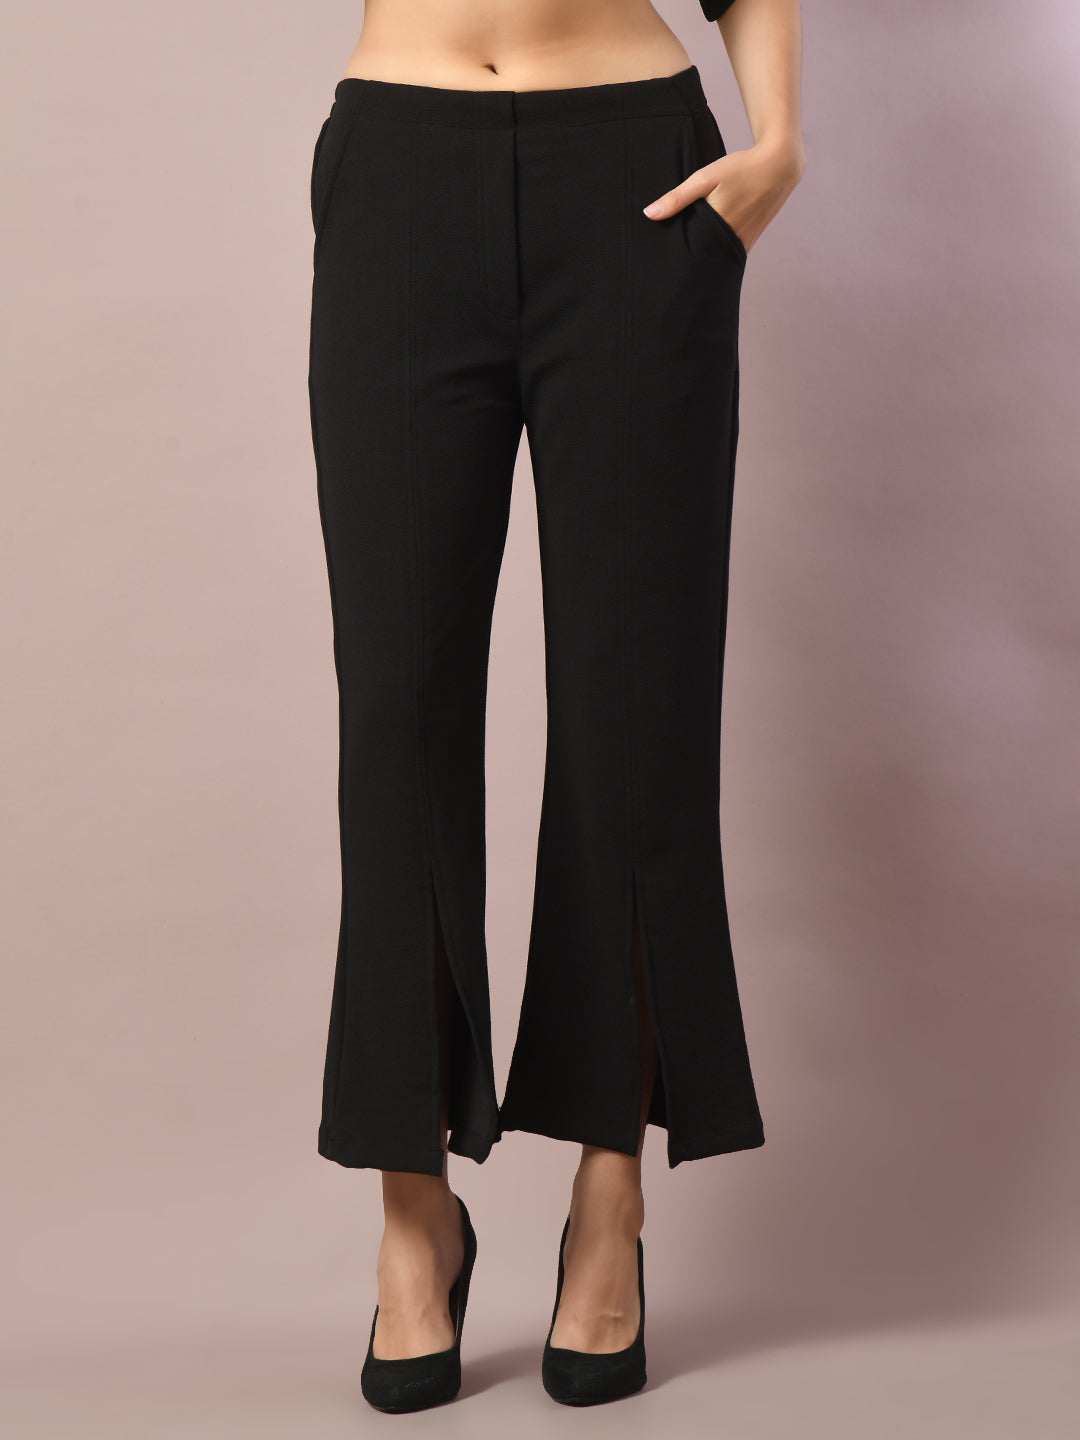 Women's  Black Solid Boat Neck Party Top With Trousers Co-Ord Set  - Myshka